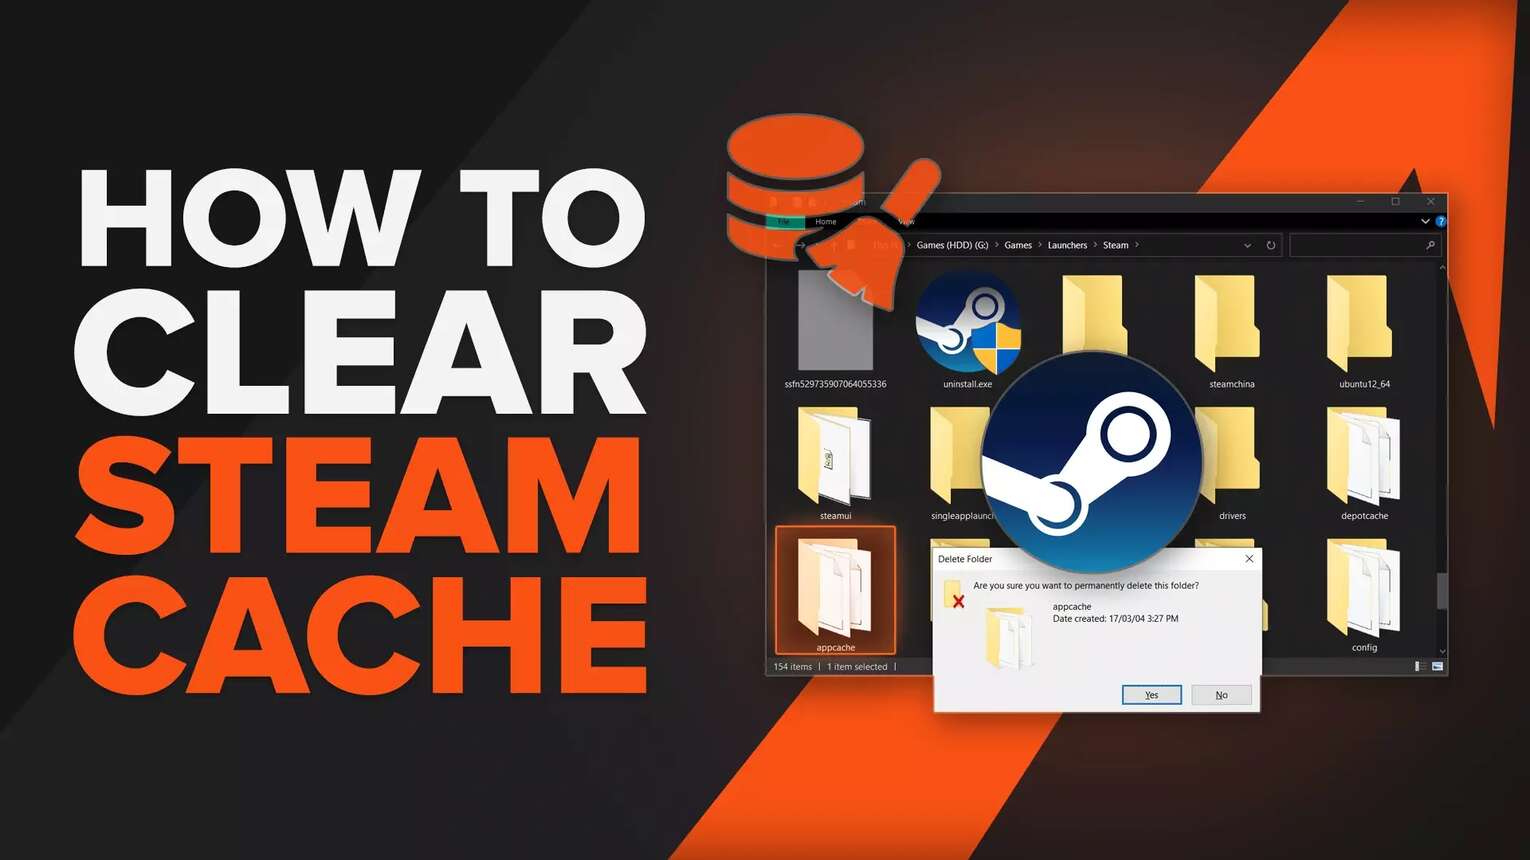 What Happens When You Clear Steam Download Cache - TechWiser